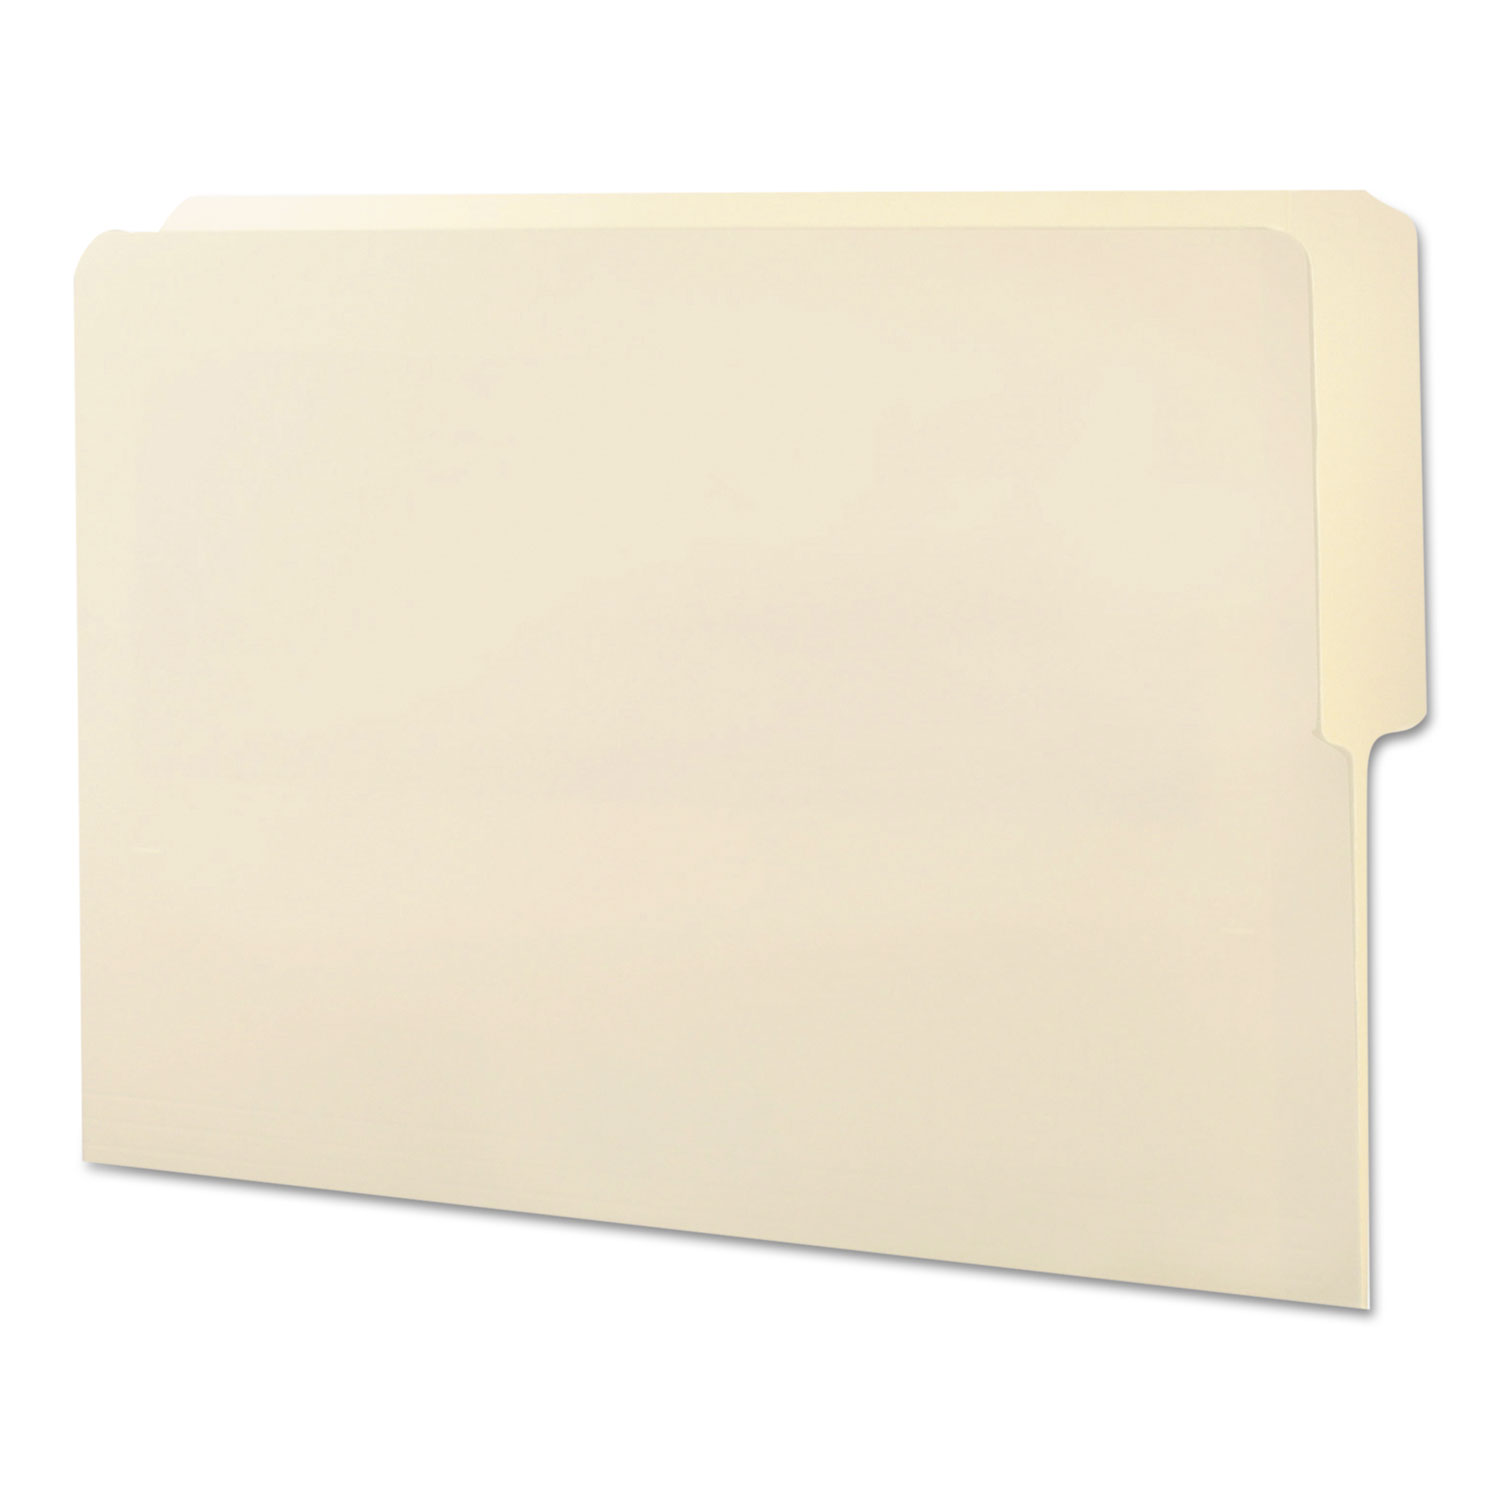  Smead 24127 Heavyweight Manila End Tab Folders, 9 Front, 1/2-Cut Tabs, Top Position, Letter Size, 100/Box (SMD24127) 